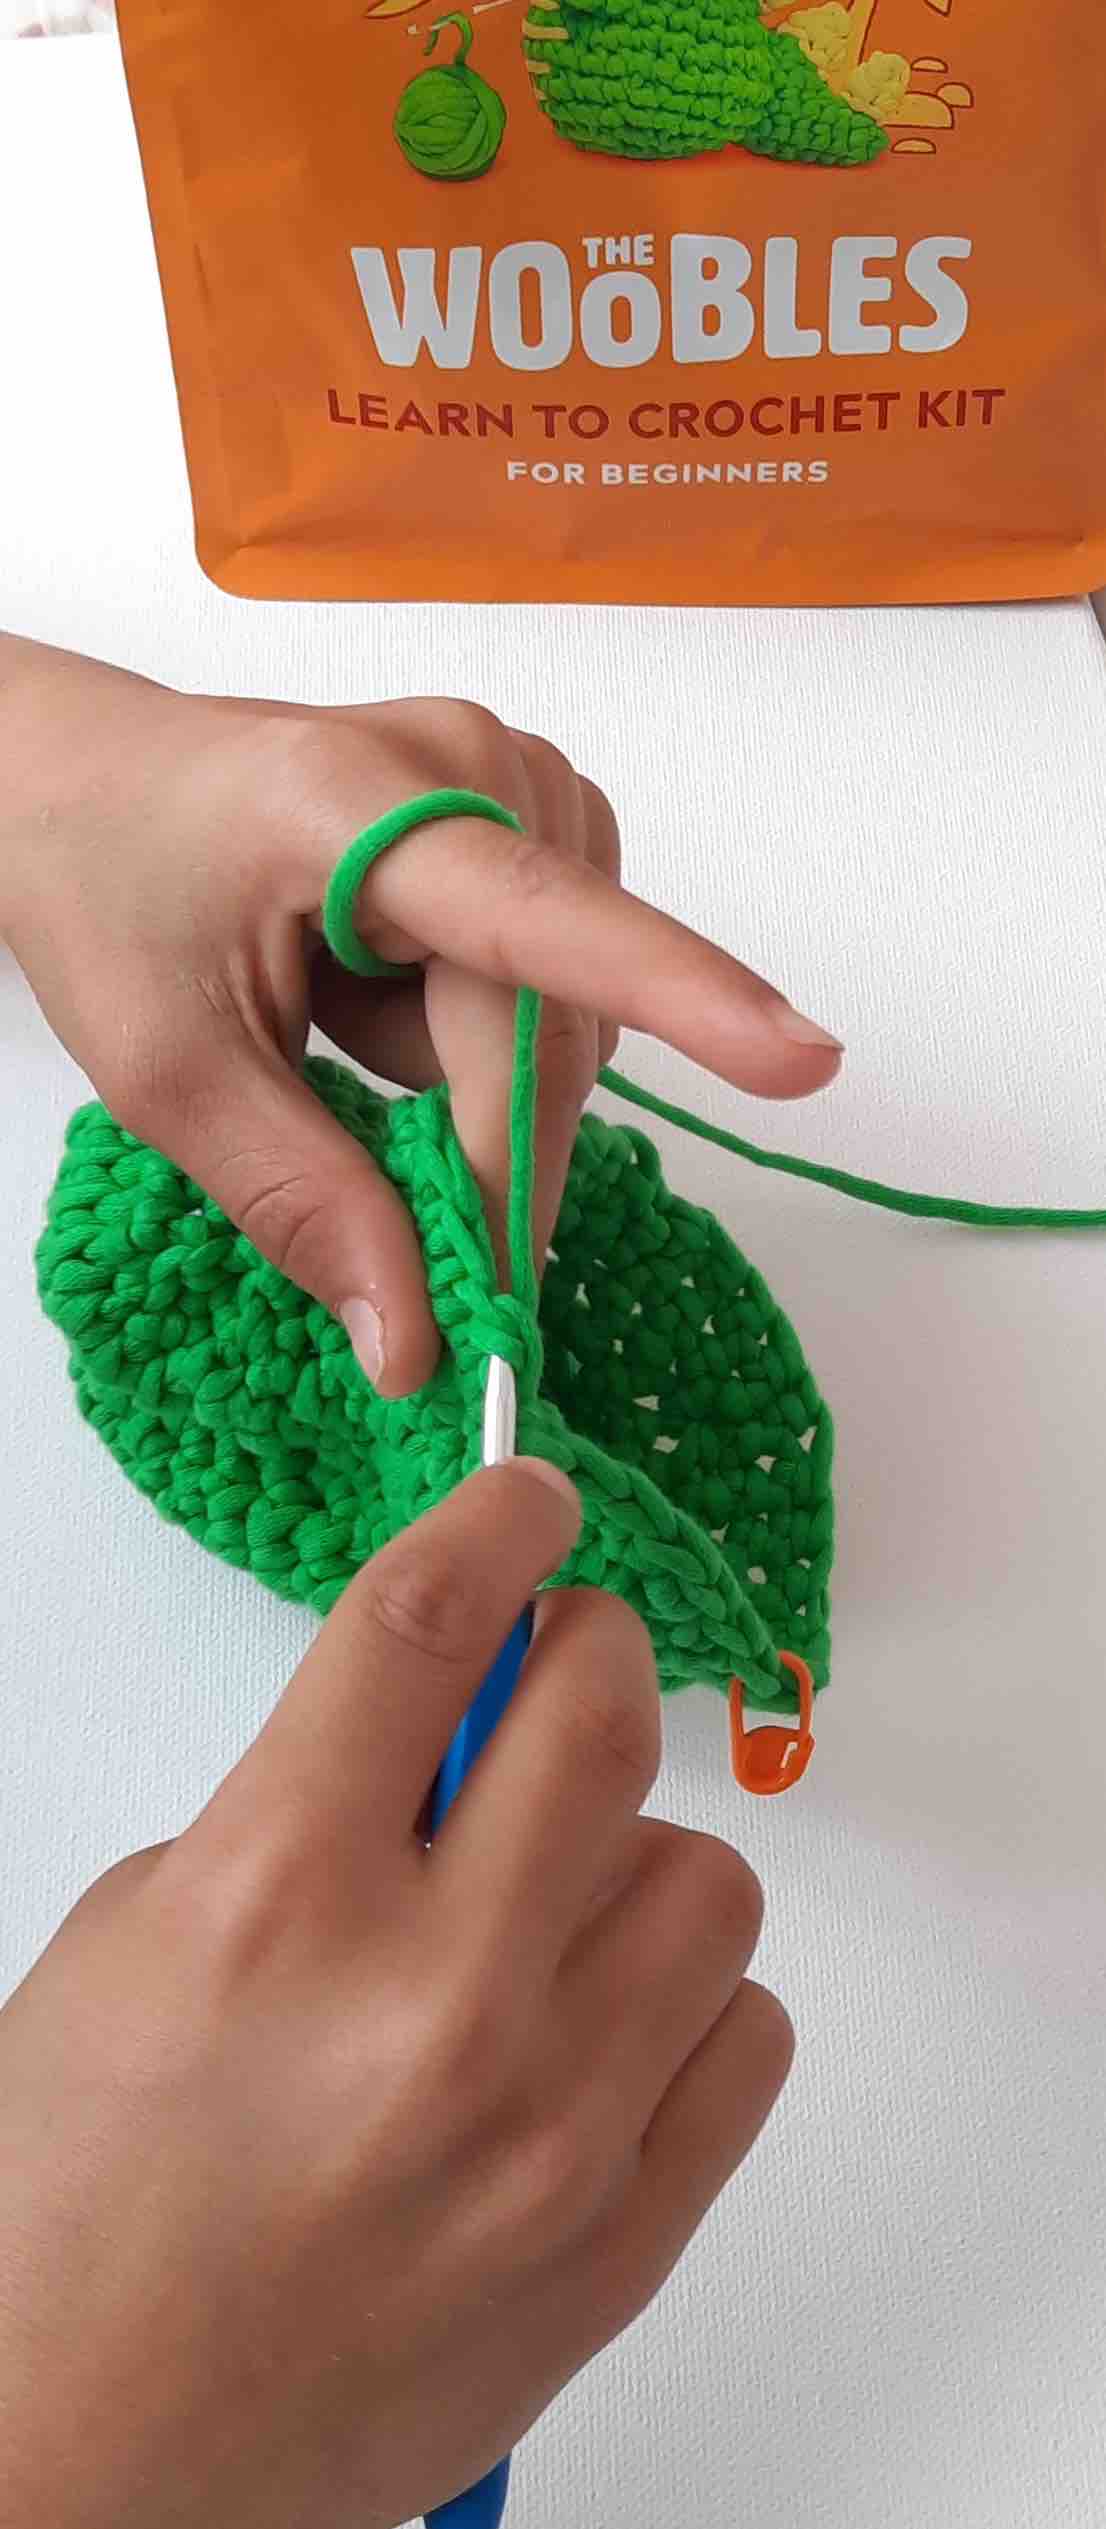 How To Teach A 6 Year Old To Crochet